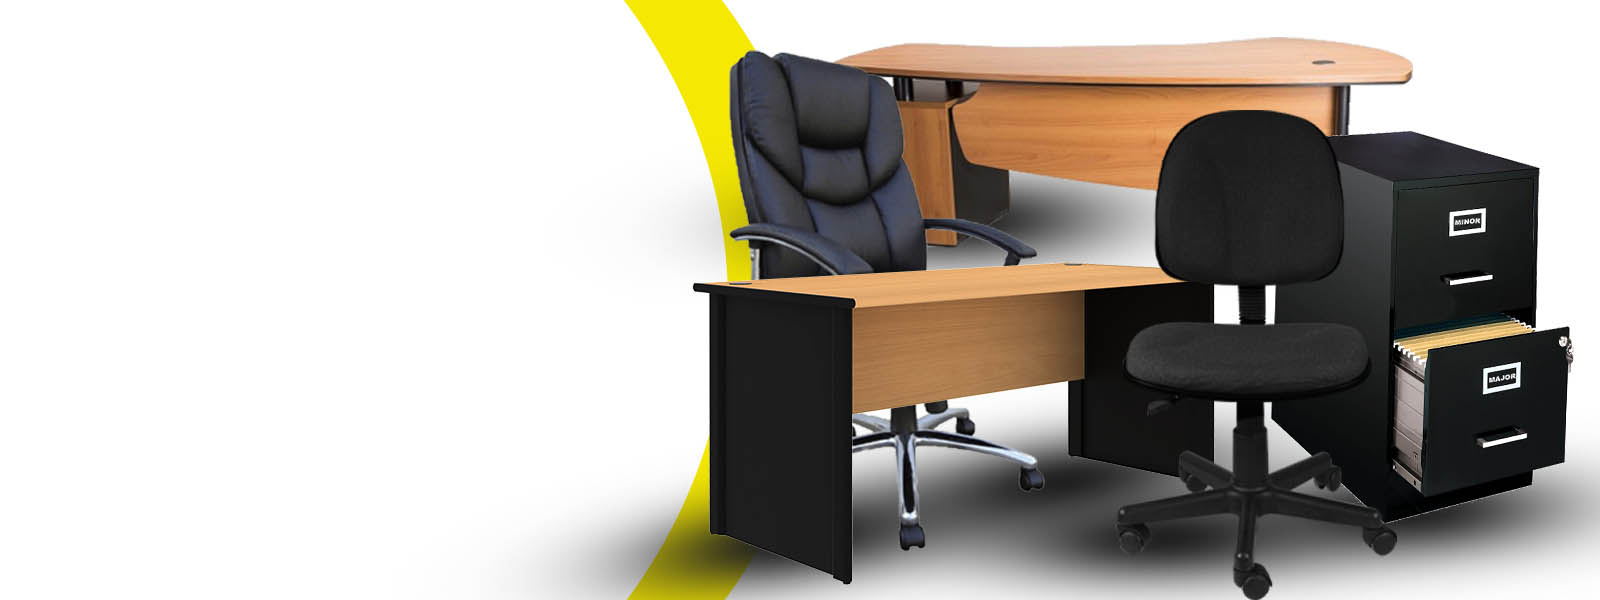 Ecoon Web Banner-#2Office Furniture